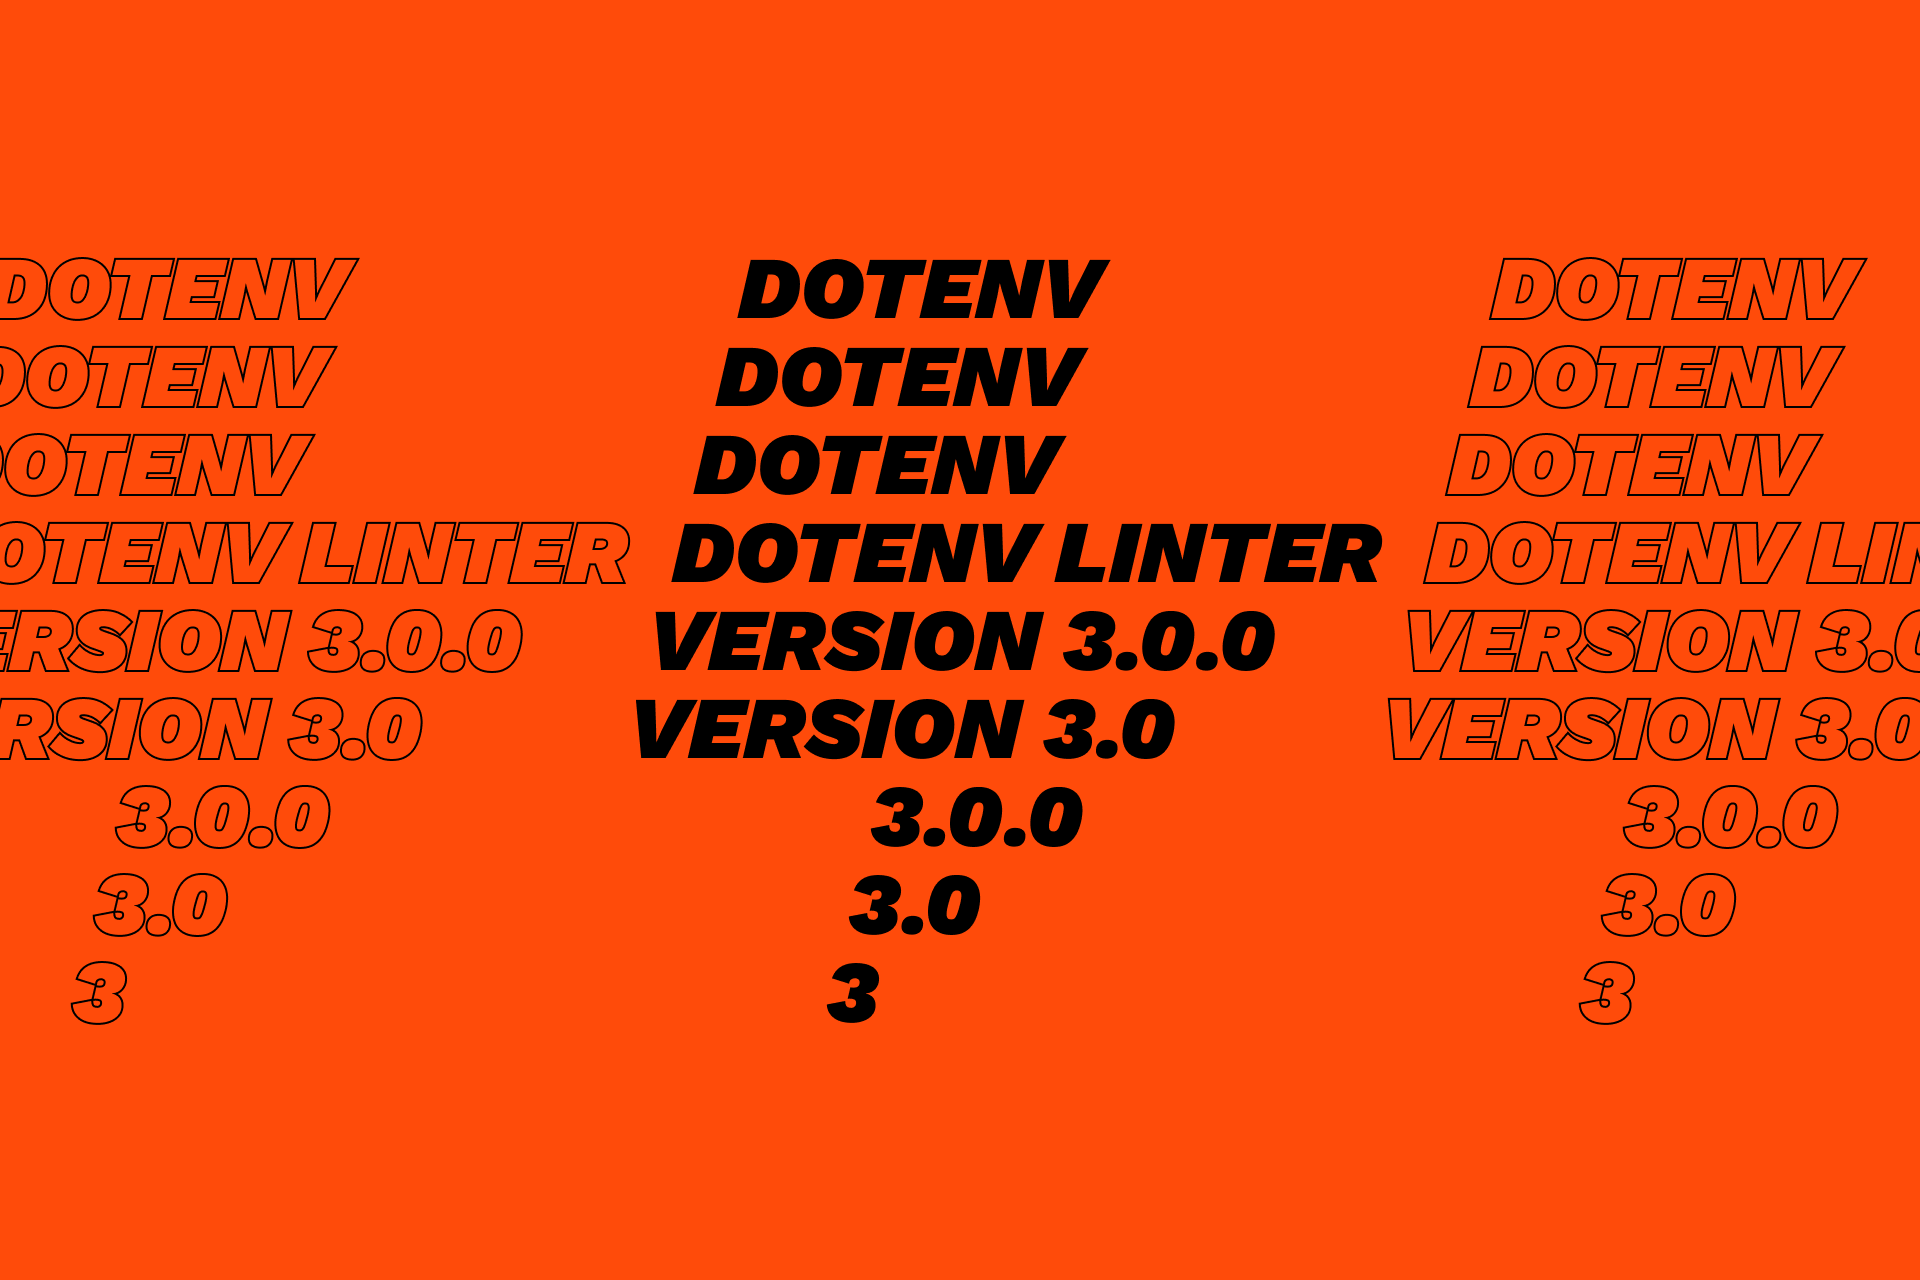 What are the key changes in dotenv-linter v3.0.0 release?